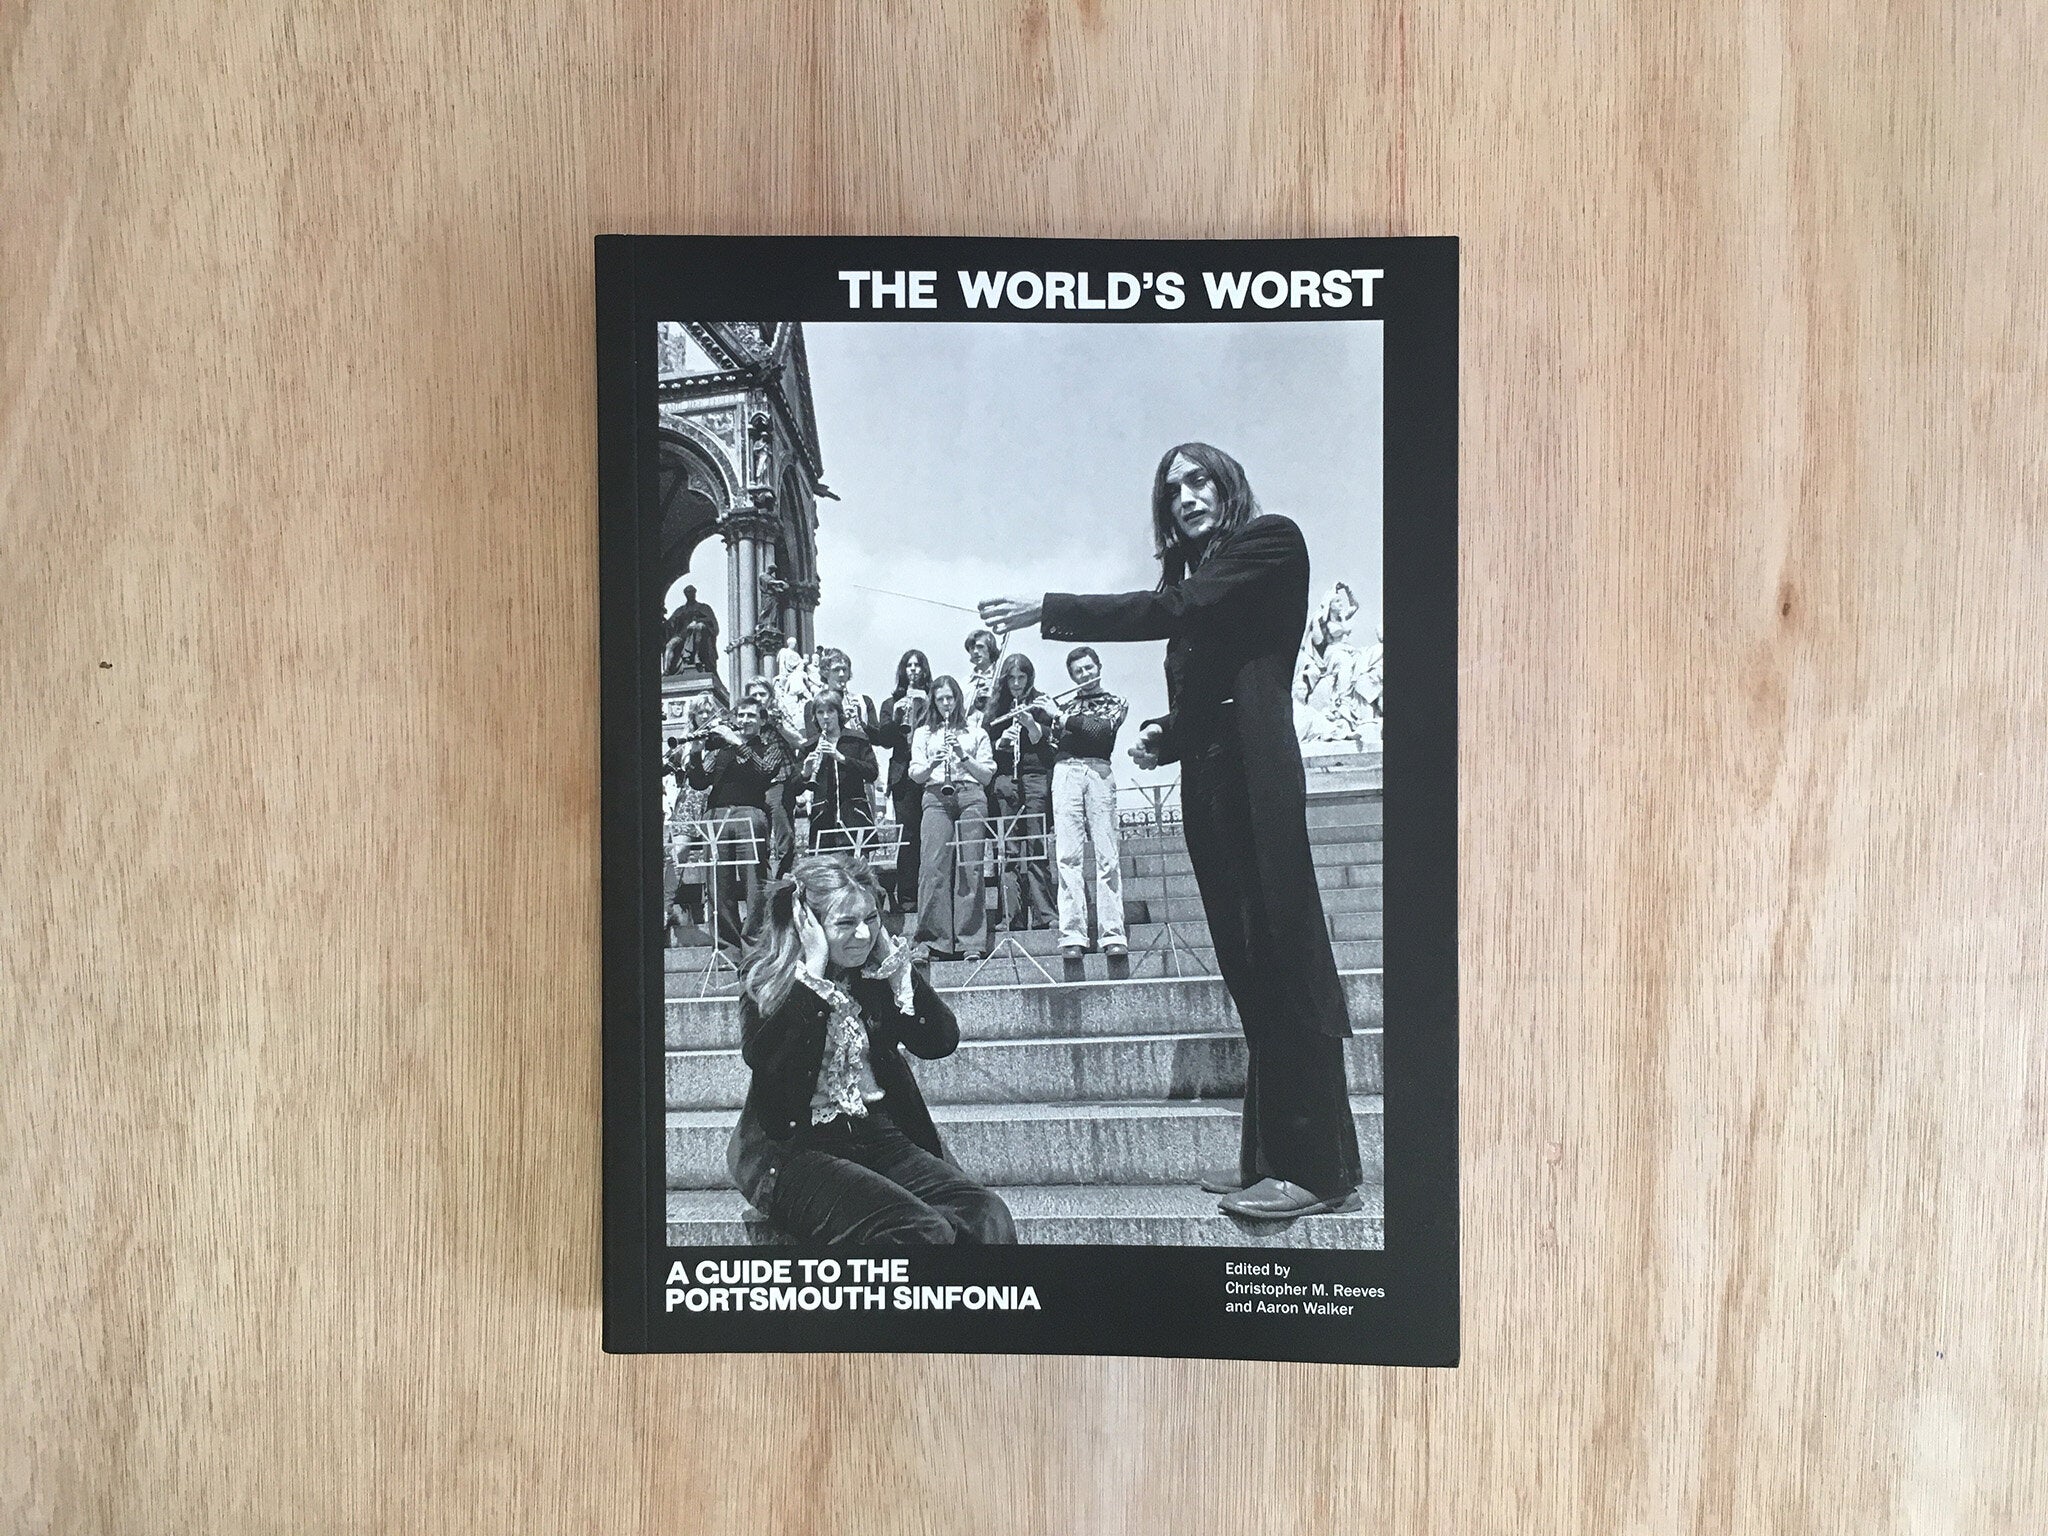 THE WORLD’S WORST: A GUIDE TO THE PORTSMOUTH SINFONIA